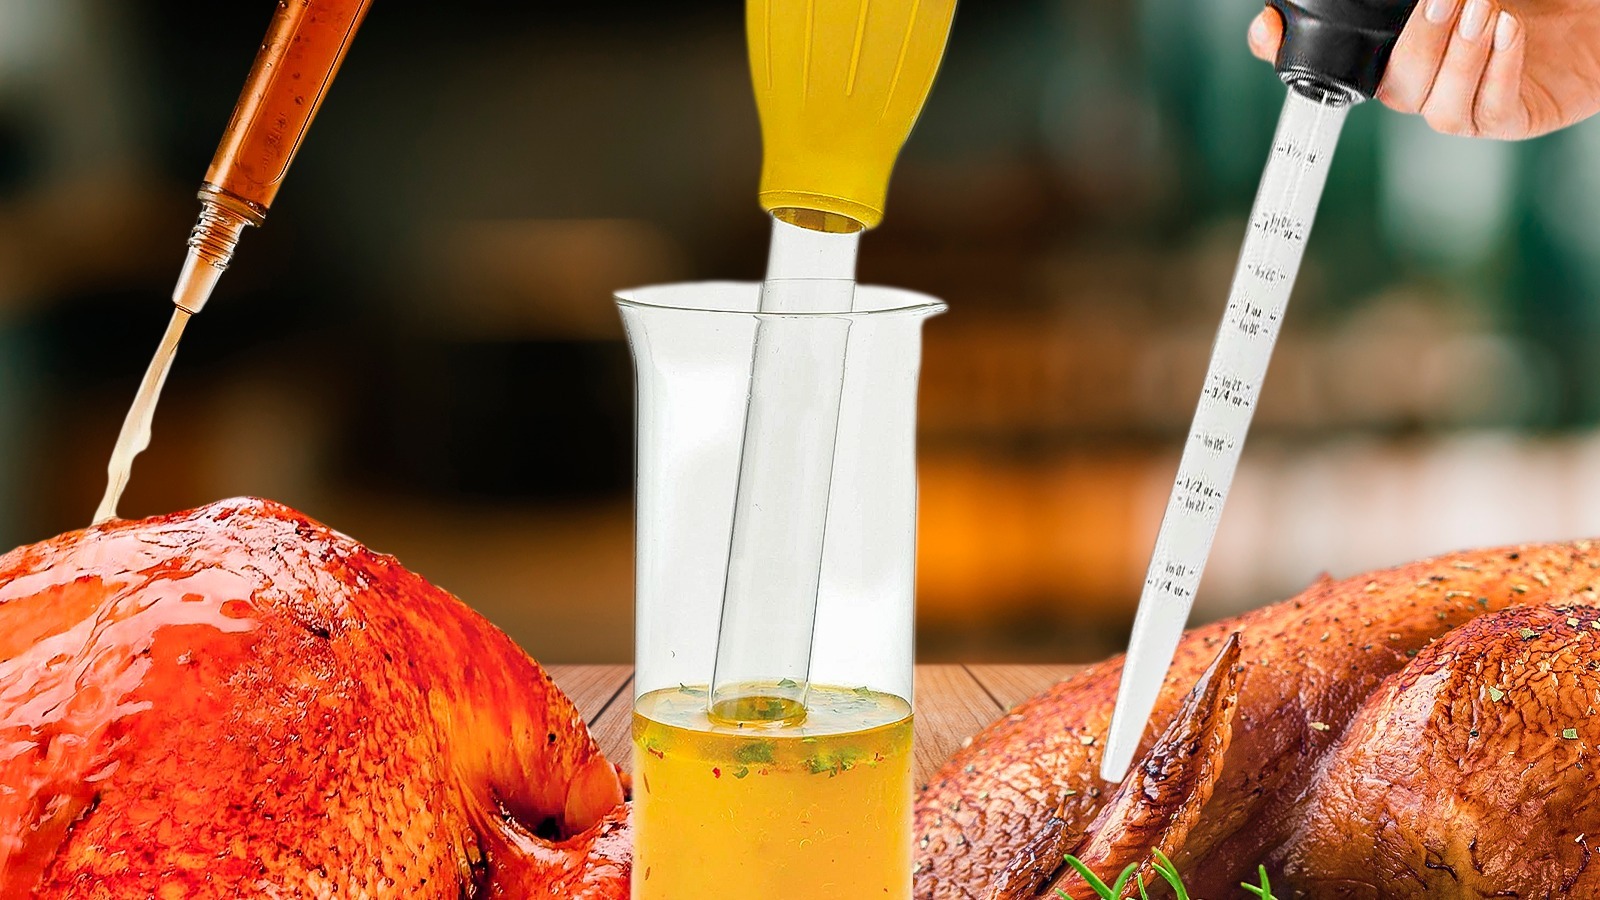 The 8 Best Turkey Basters to Buy, According to Reviews